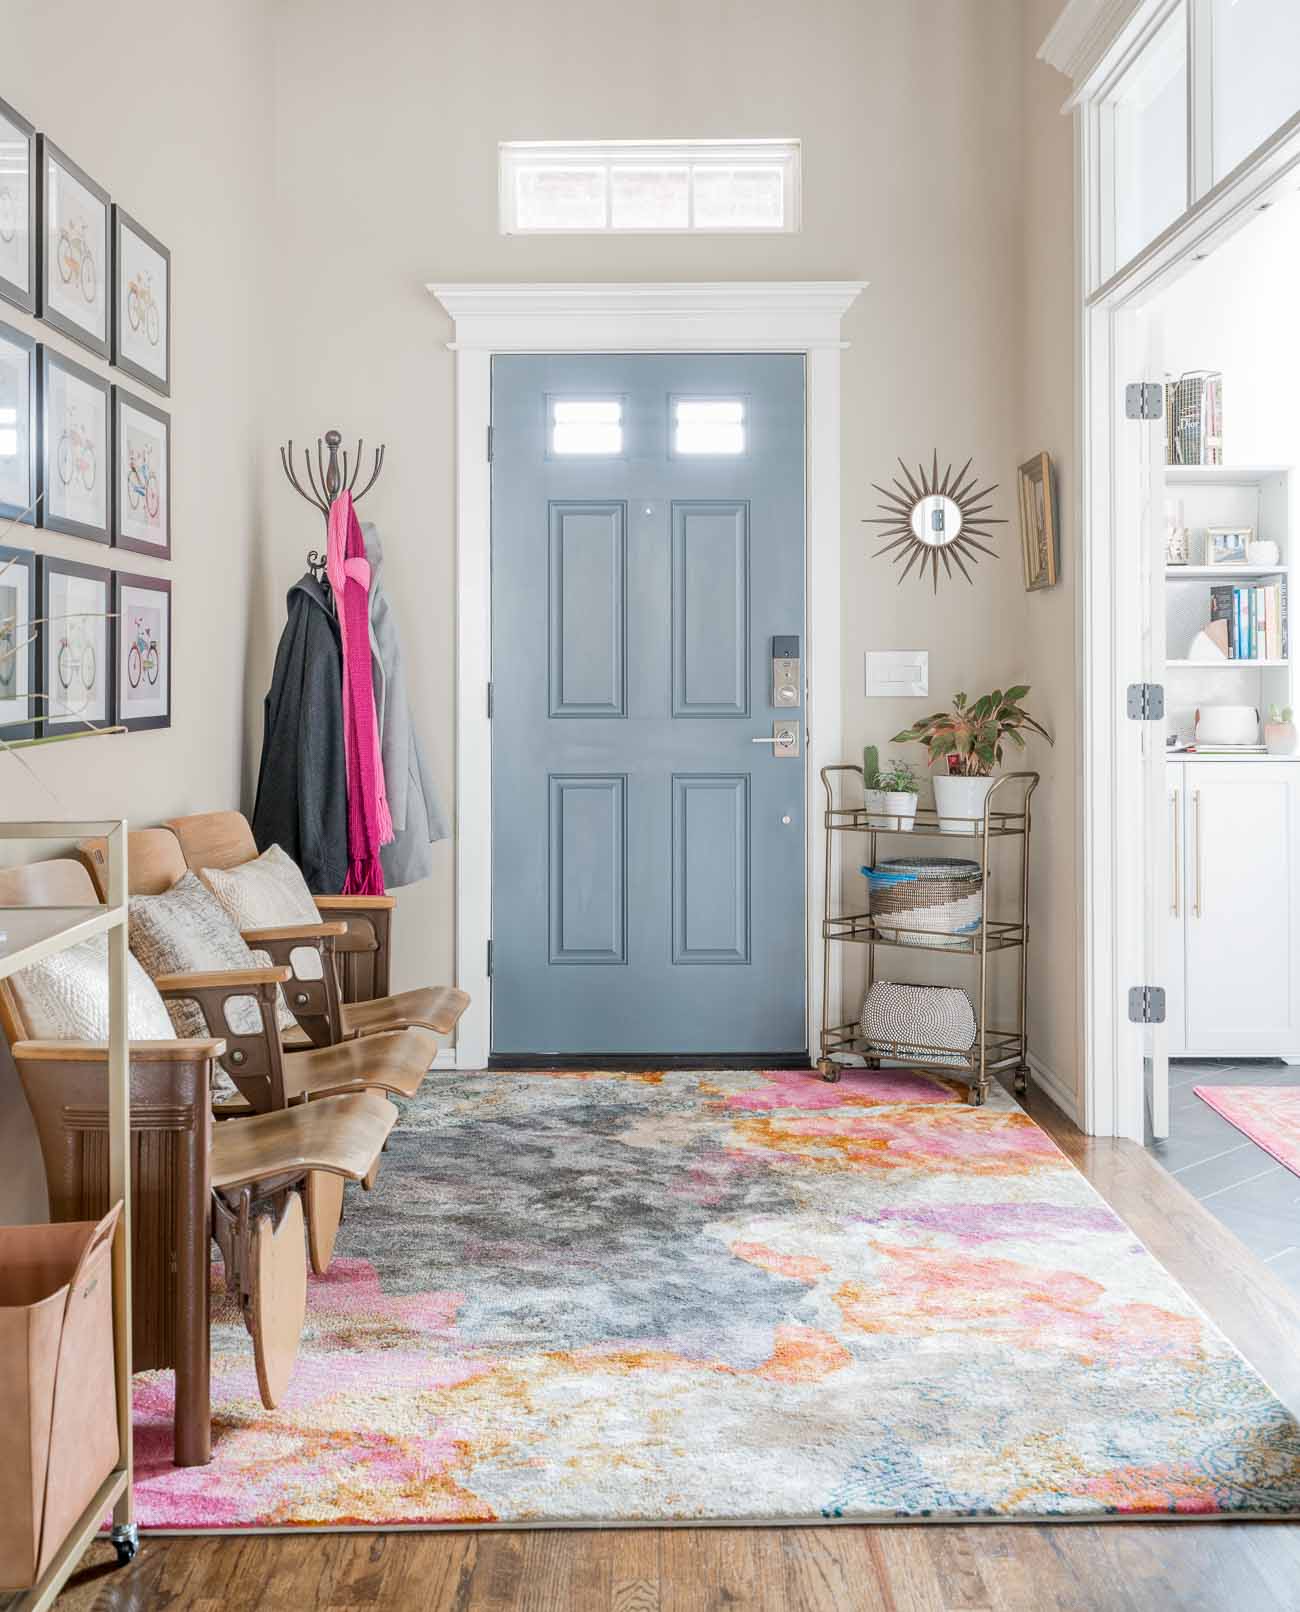 Entryway with gray door, bold rug, and vintage auditorium seating.